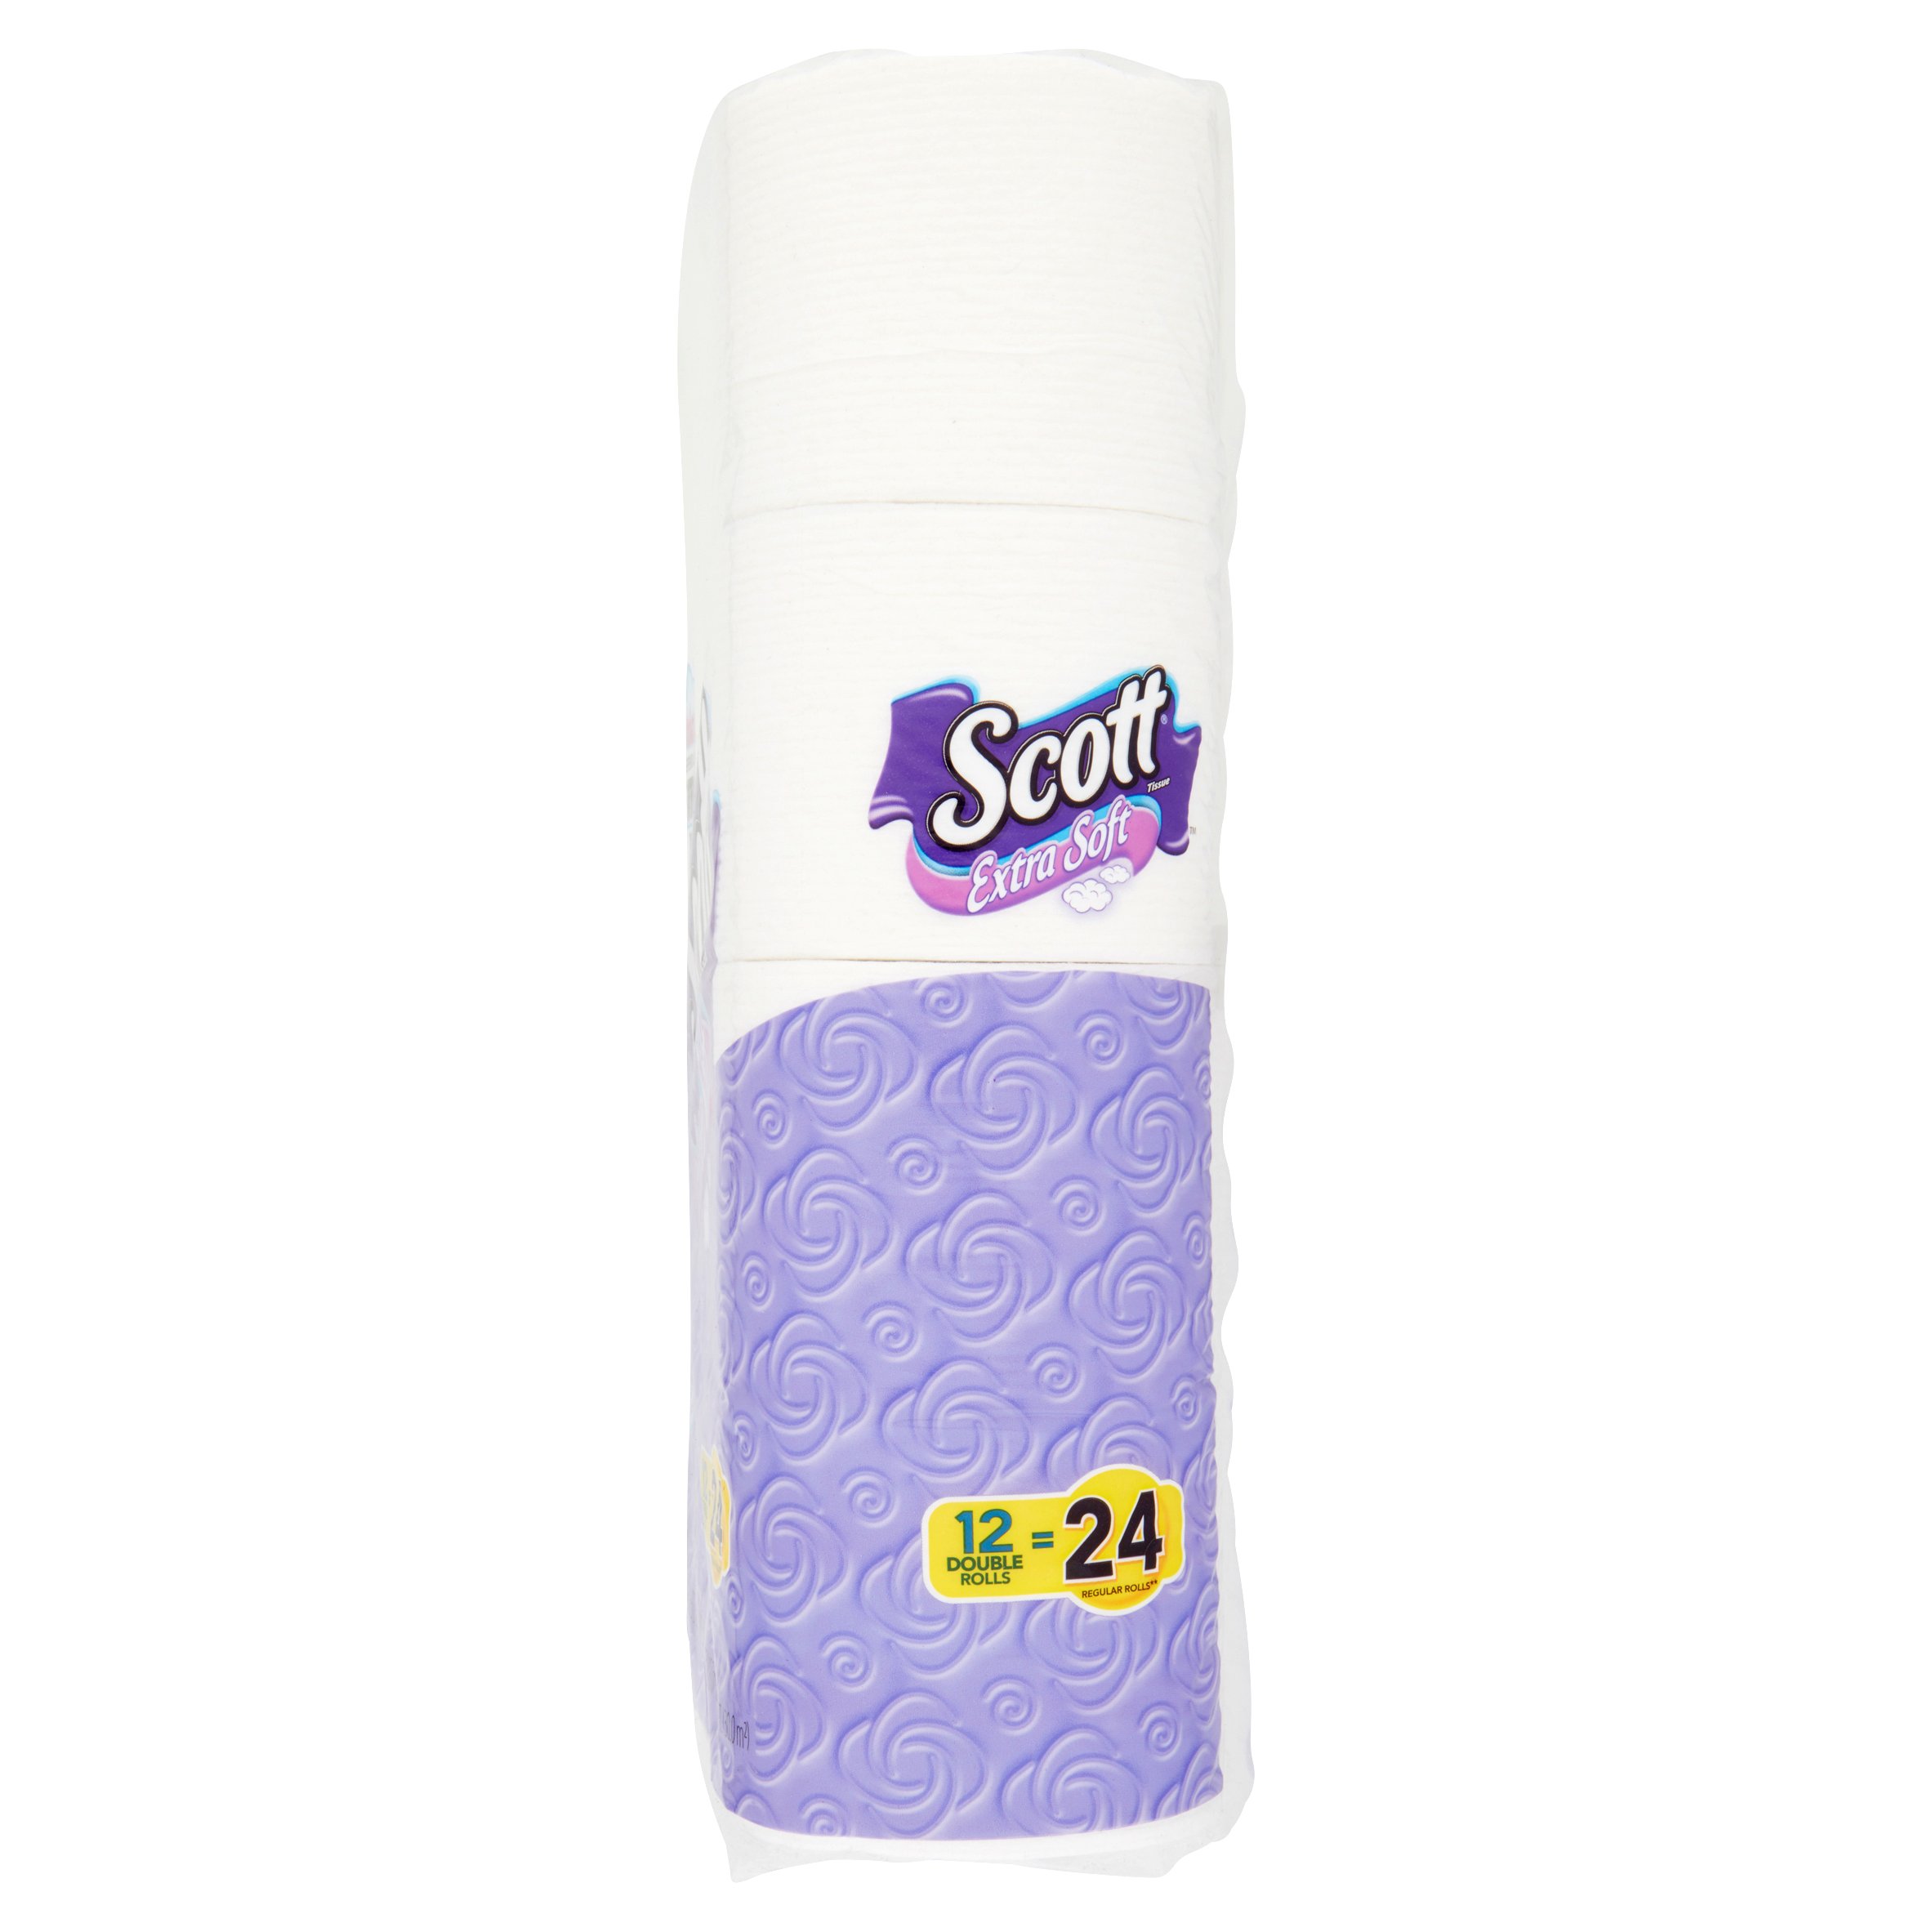 Scott Toilet Paper, Extra Soft, 12 Double Rolls - image 5 of 6